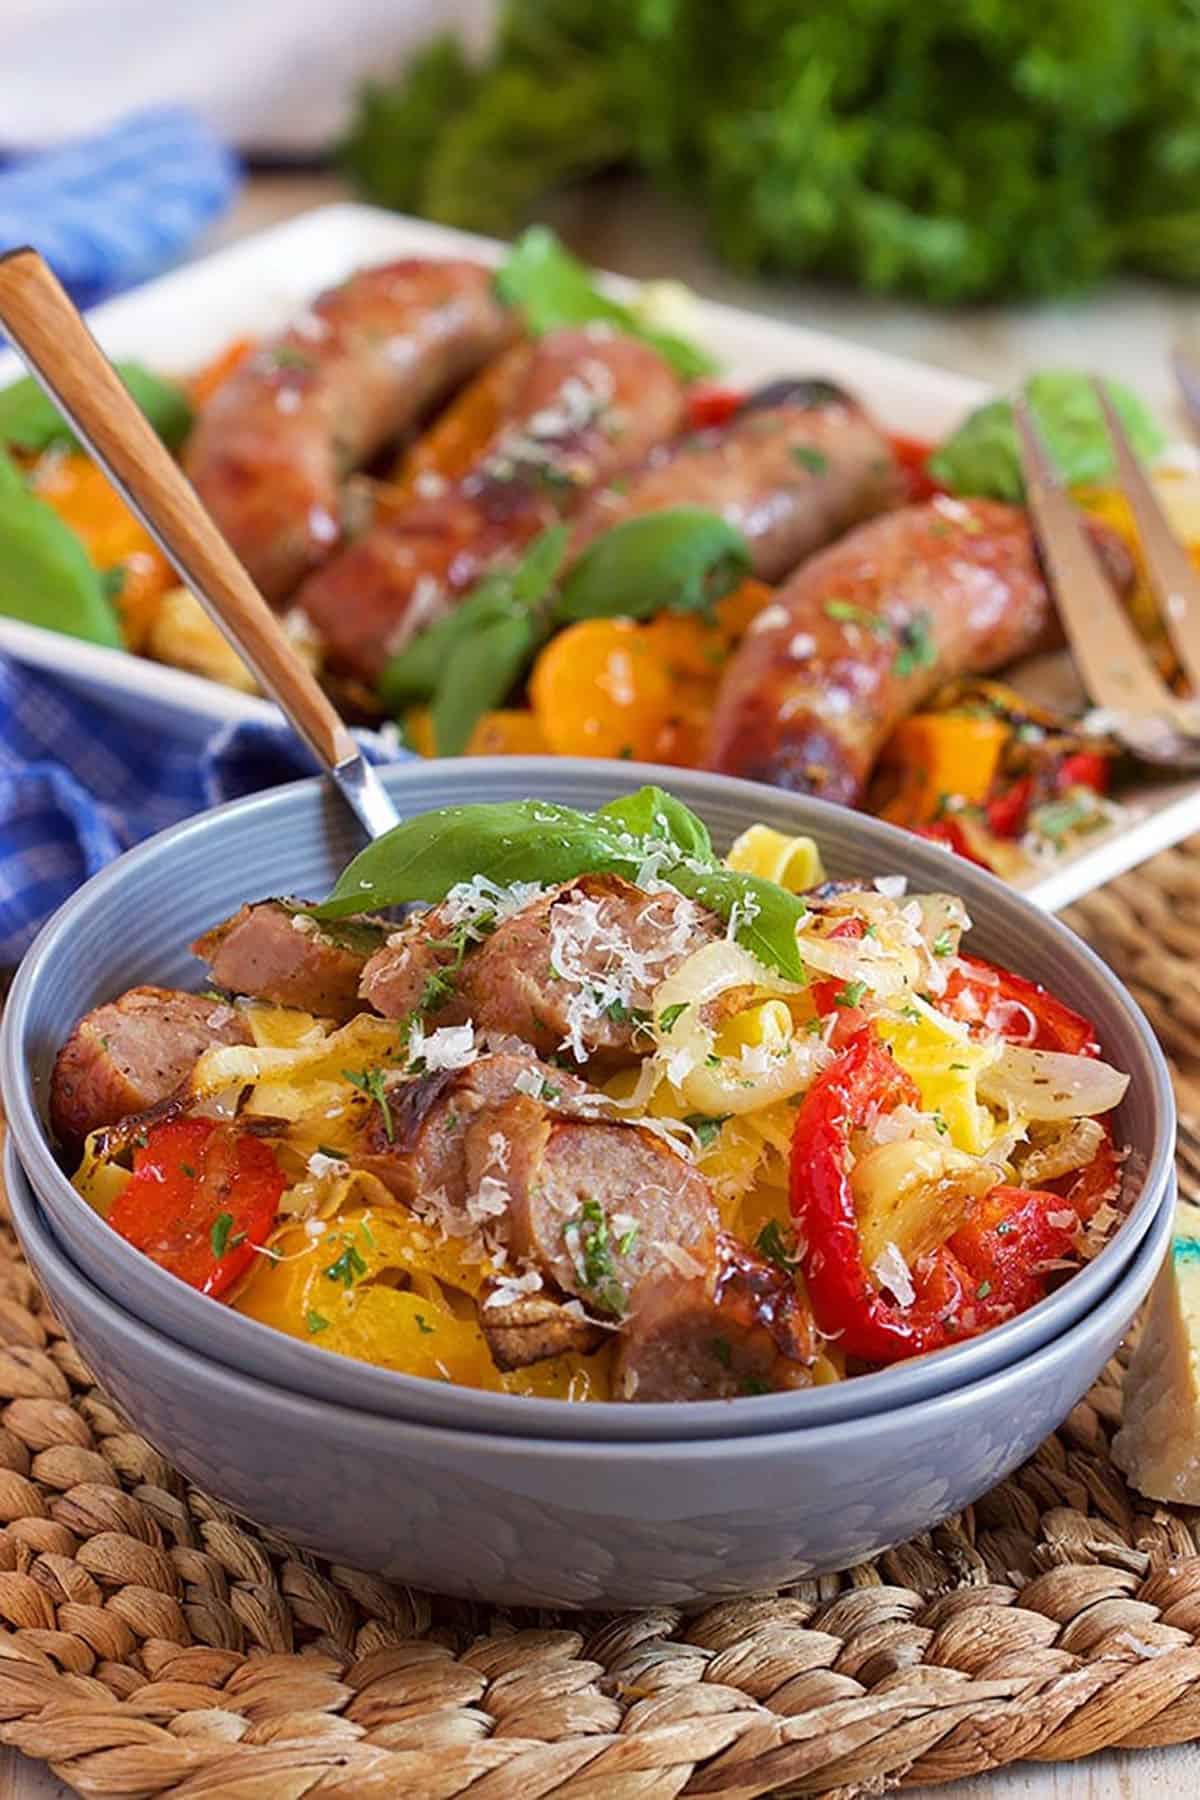 Sheet Pan Sausage and Peppers on pasta in a blue bowl with a wooden fork.